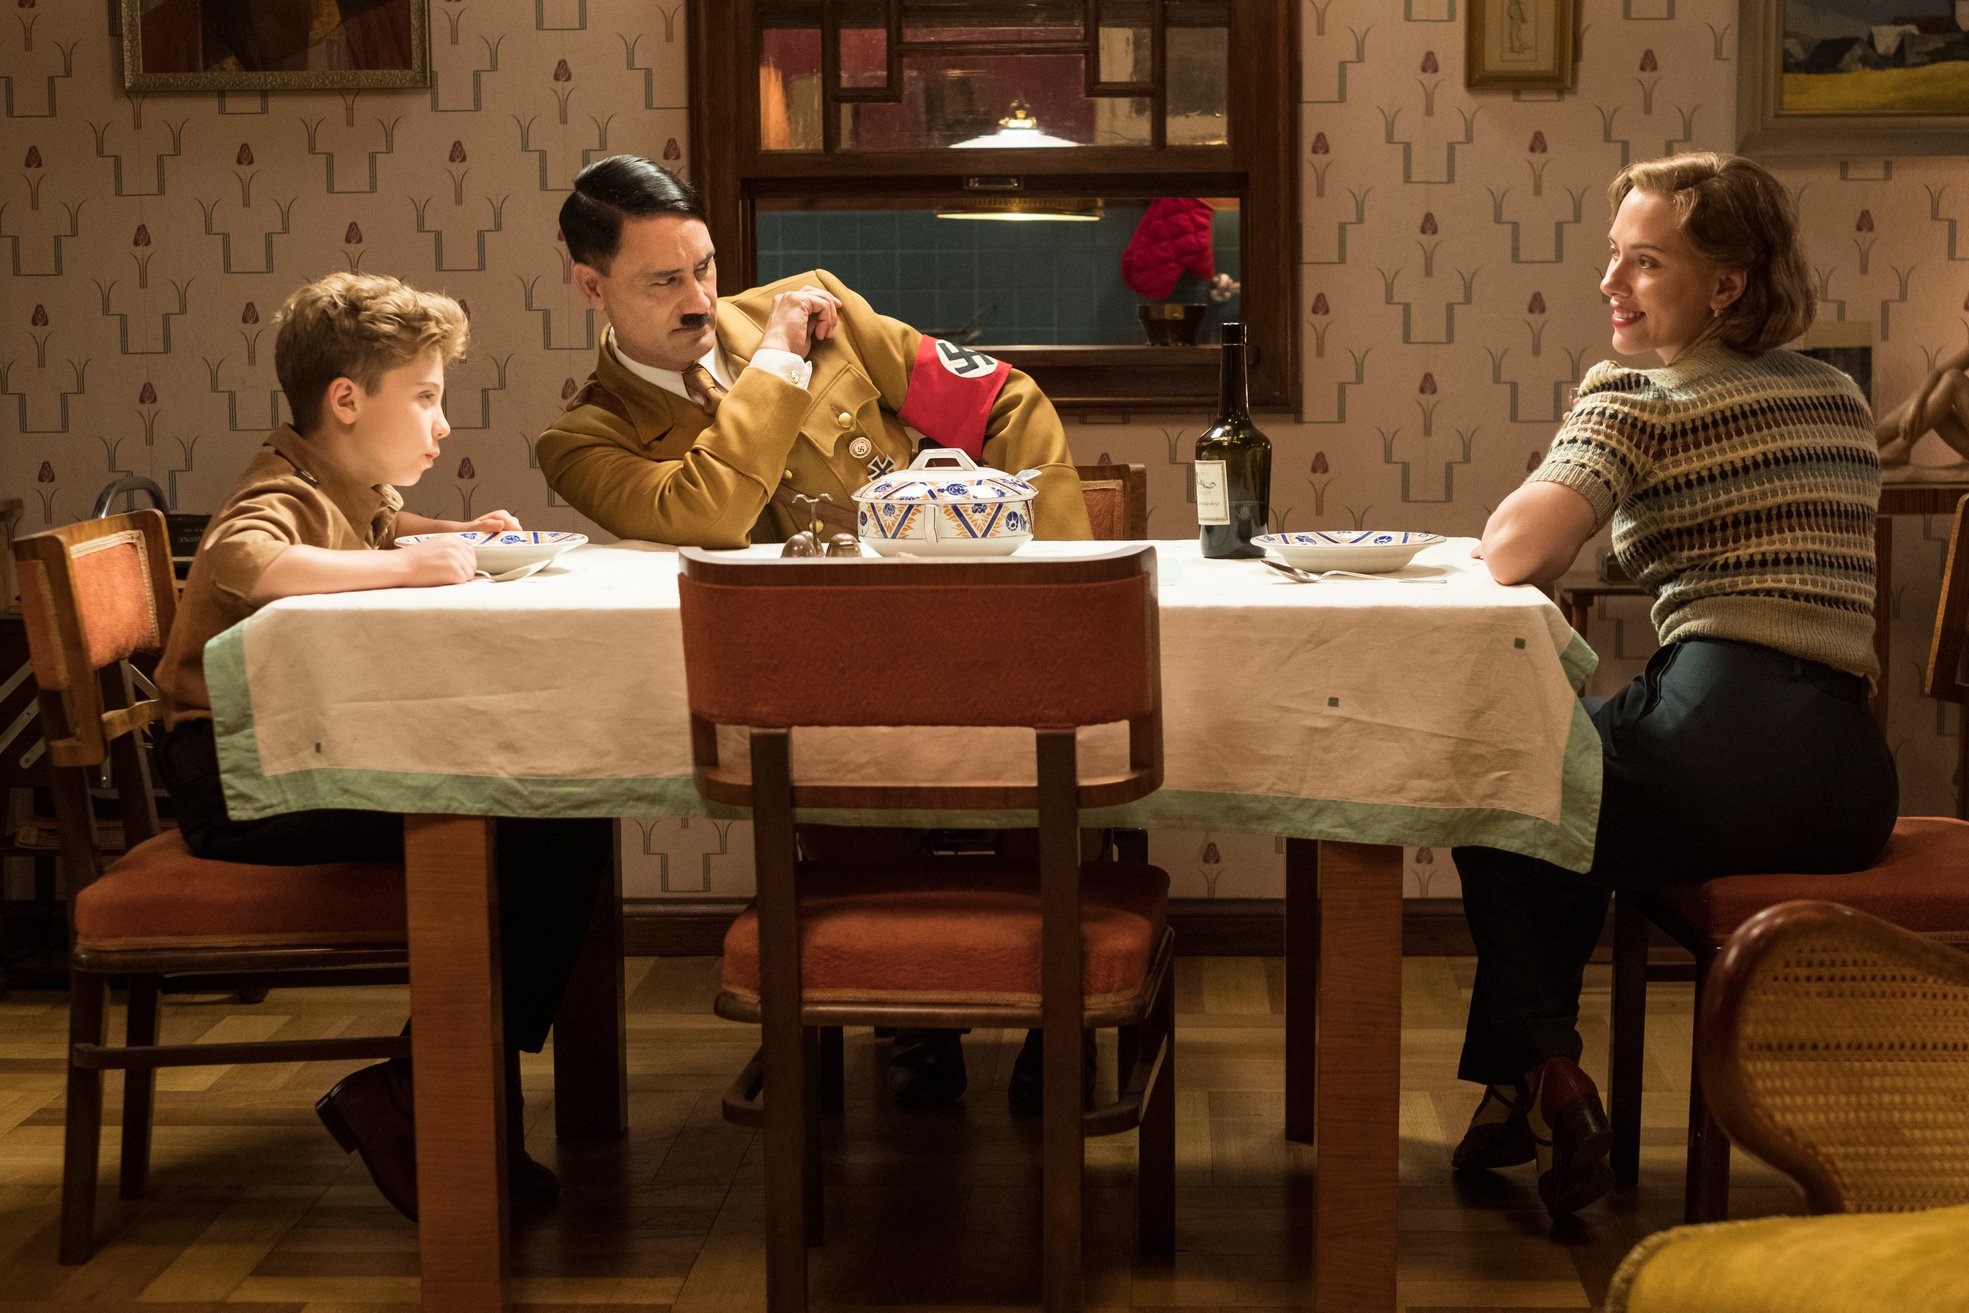  Jojo (played by Roman Griffin Davis) having dinner with his imaginary friend Adolf (played by writer/director Taika Waititi), and his mother, Rosie (Scarlett Johansson)